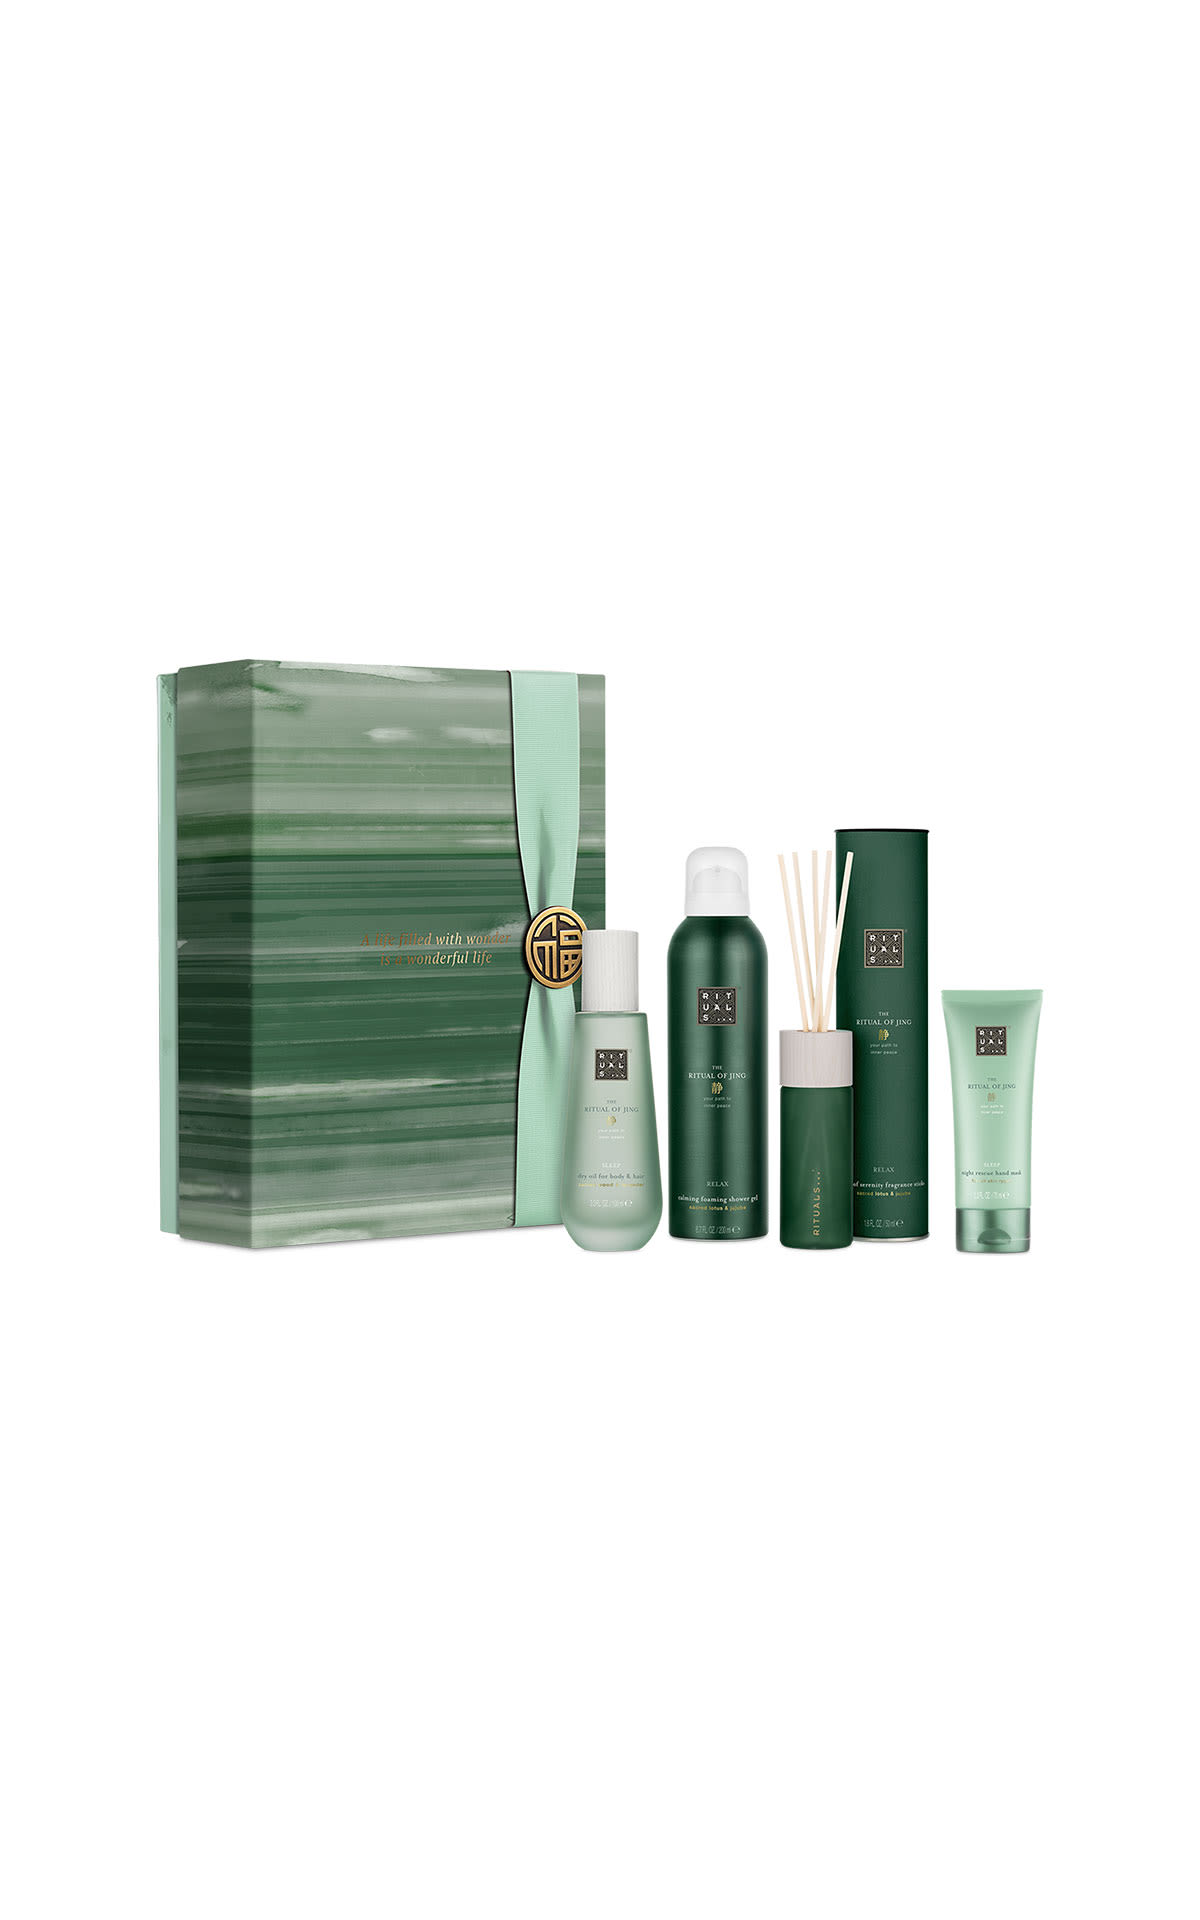 Rituals The Ritual of jing large gift set from Bicester Village